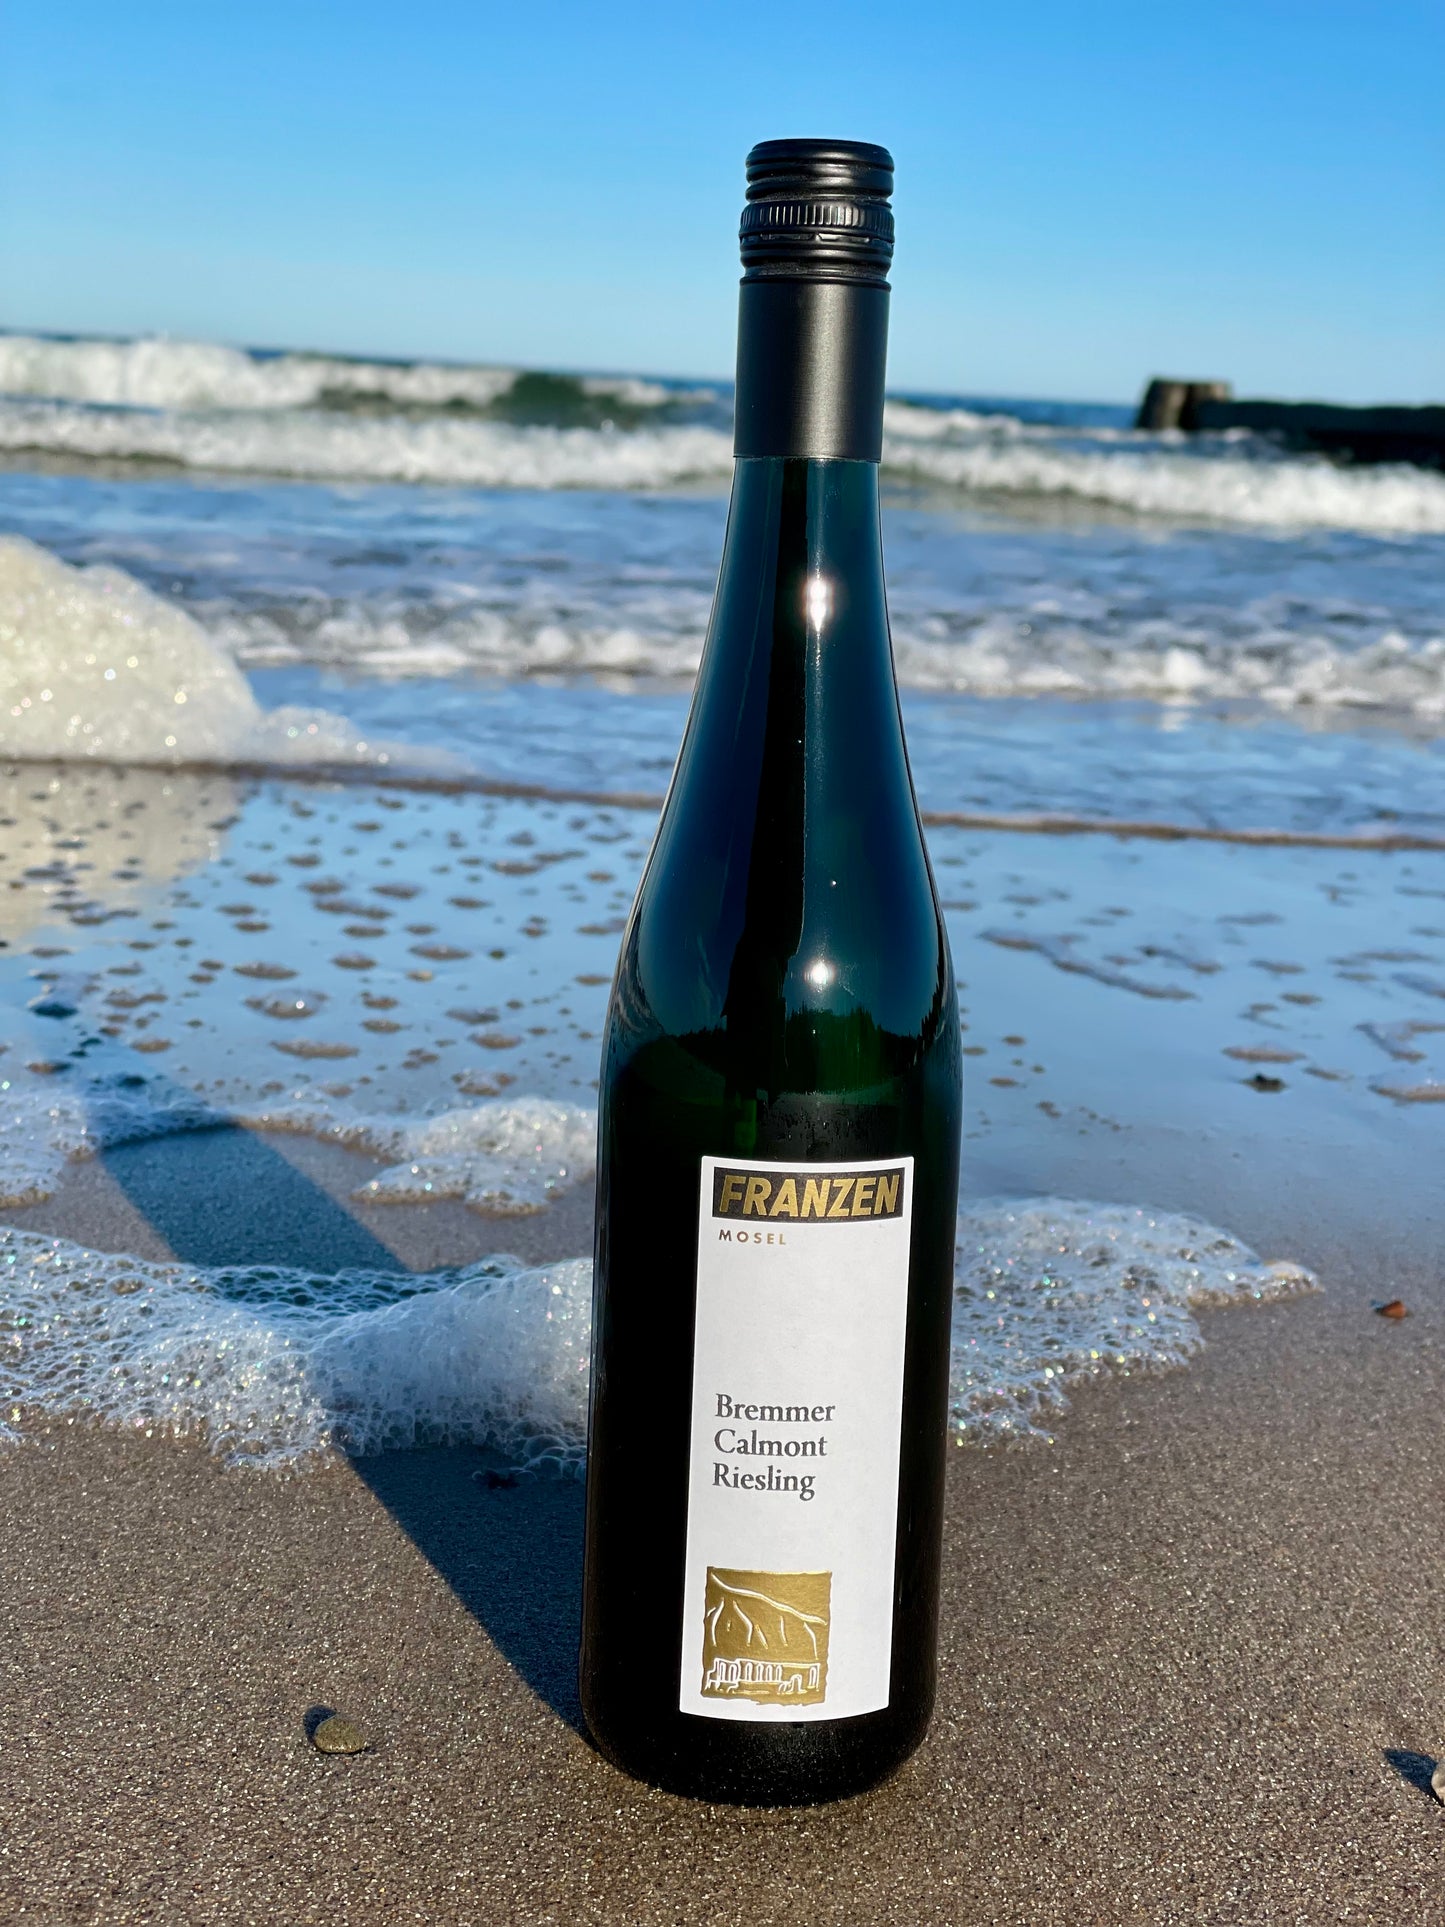 2019 Riesling “Bremmer Calmont”